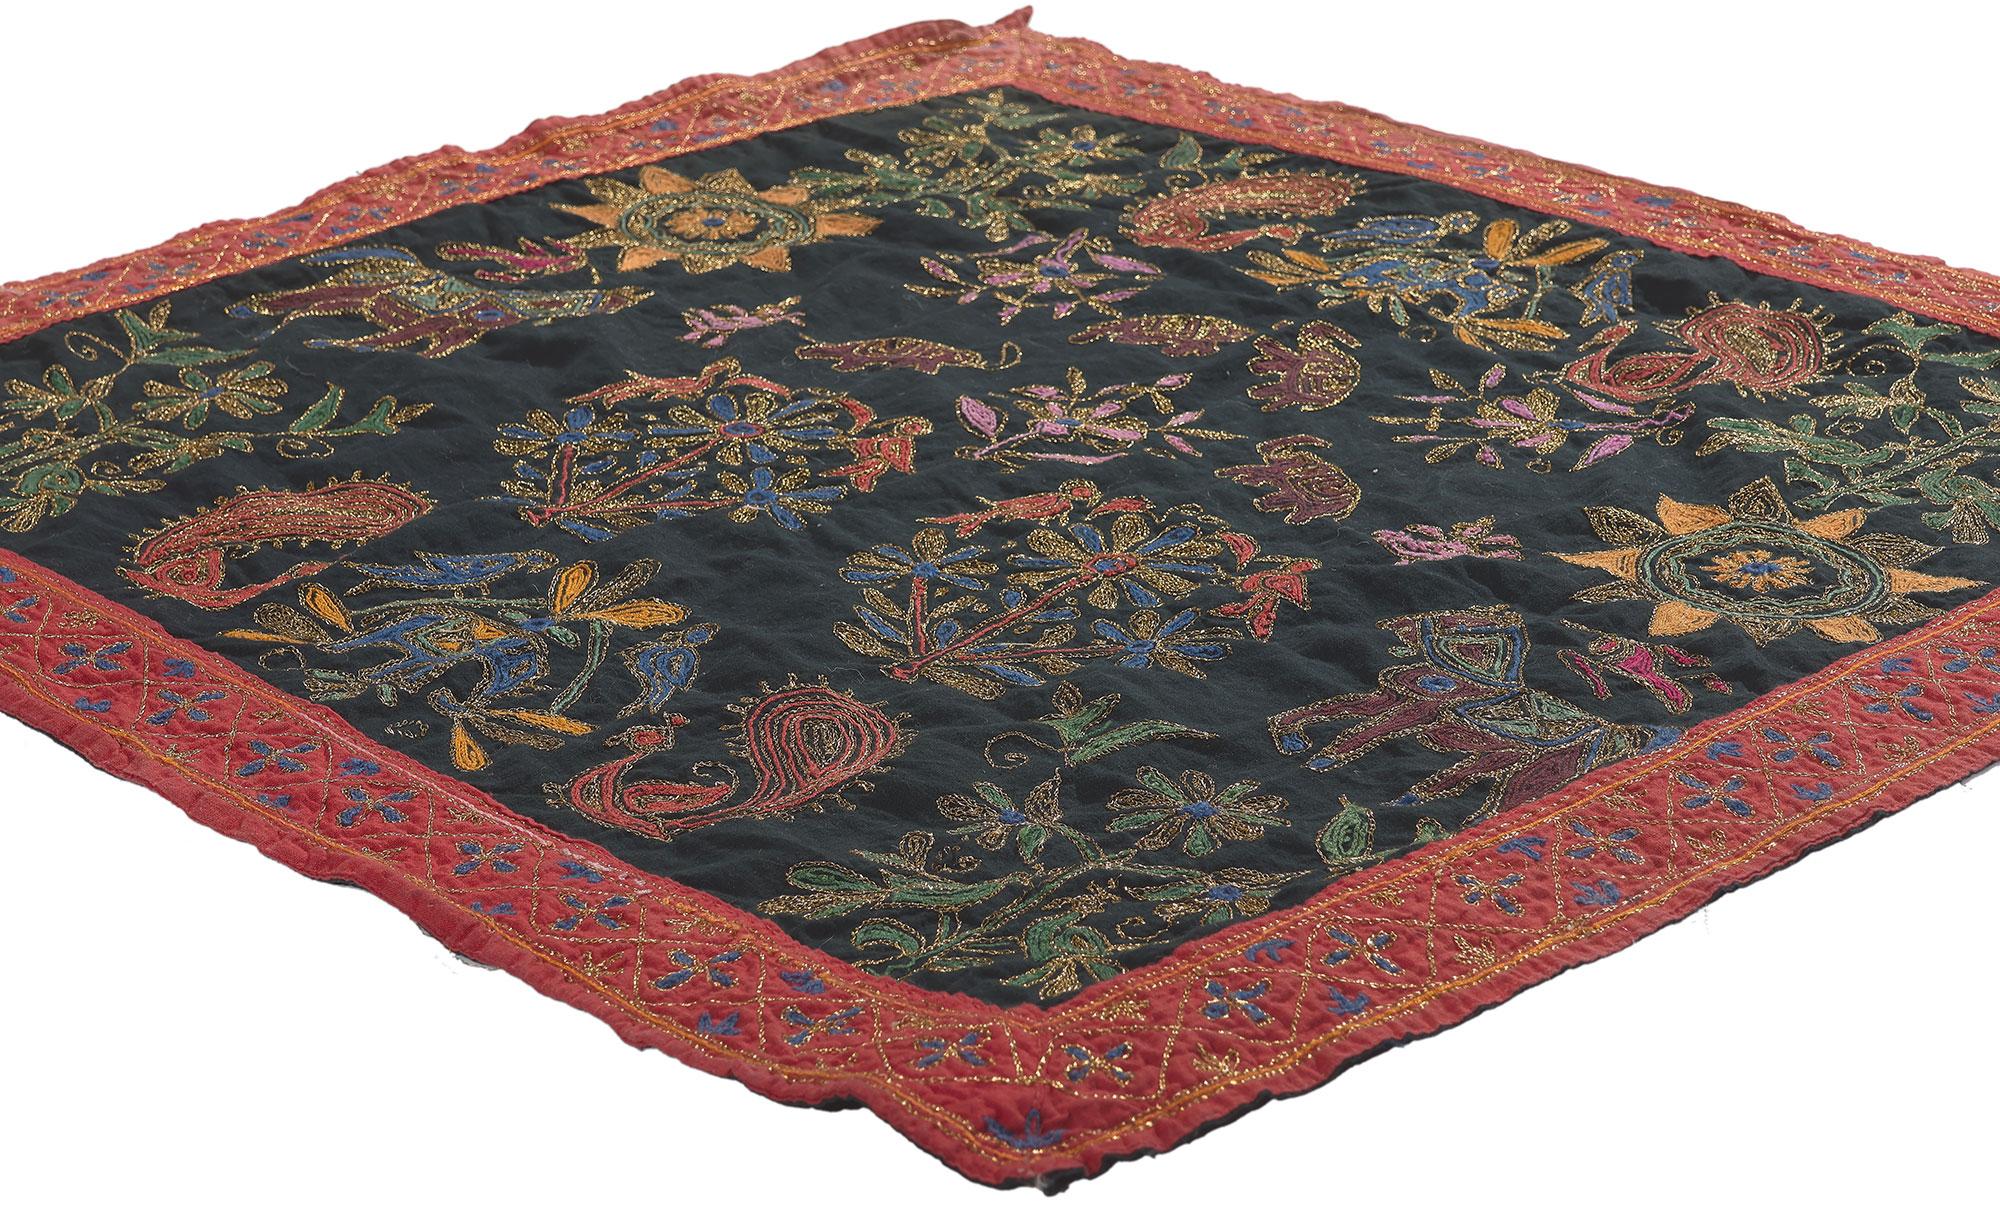 78459 Vintage Indian Kashmiri Embroidered Tapestry 02'10 x 02'09.
Emulating maximalist style with opulent detail work and lavish texture, this vintage embroidered tapestry from India is a captivating vision of woven beauty. The intricate